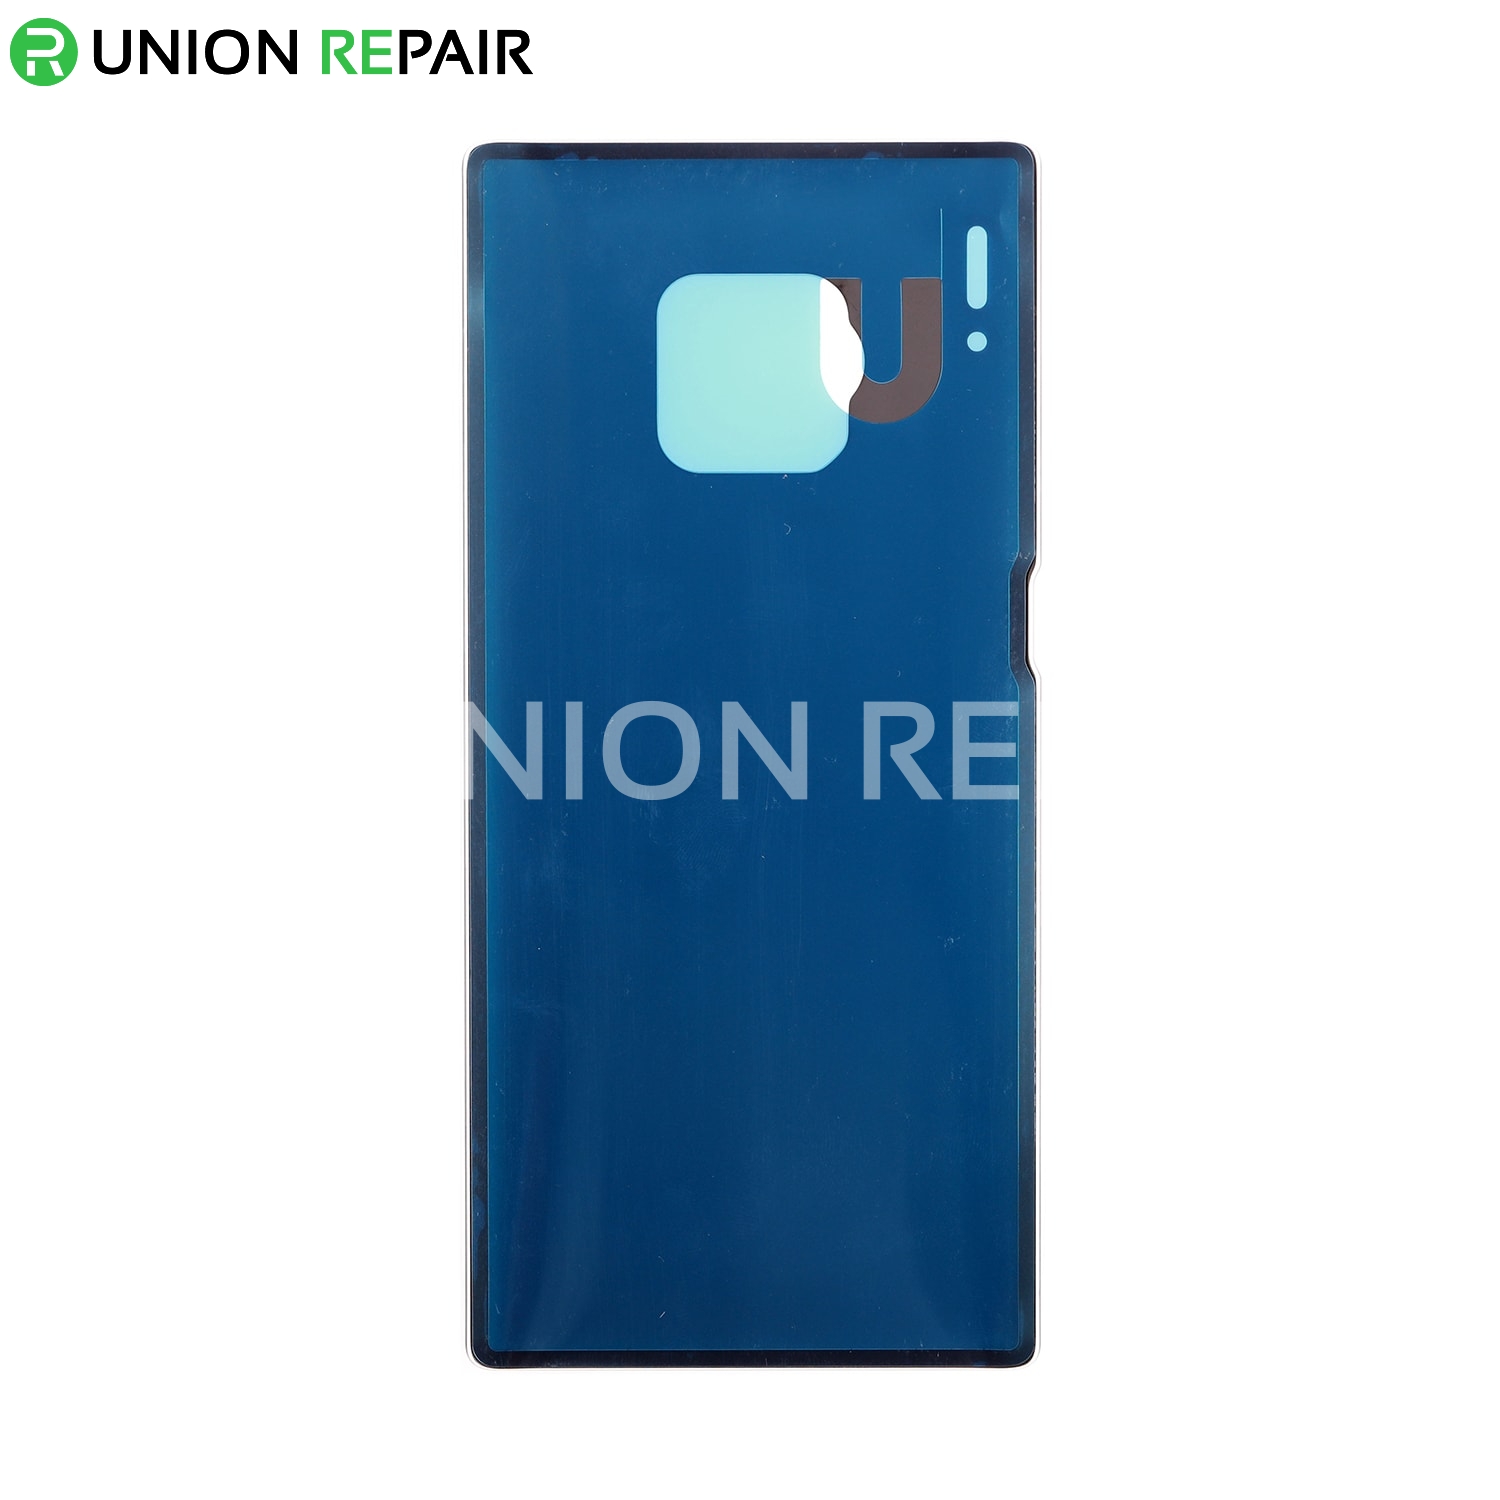 Replacement for Huawei Mate 30 Pro Battery Door - Forest Green